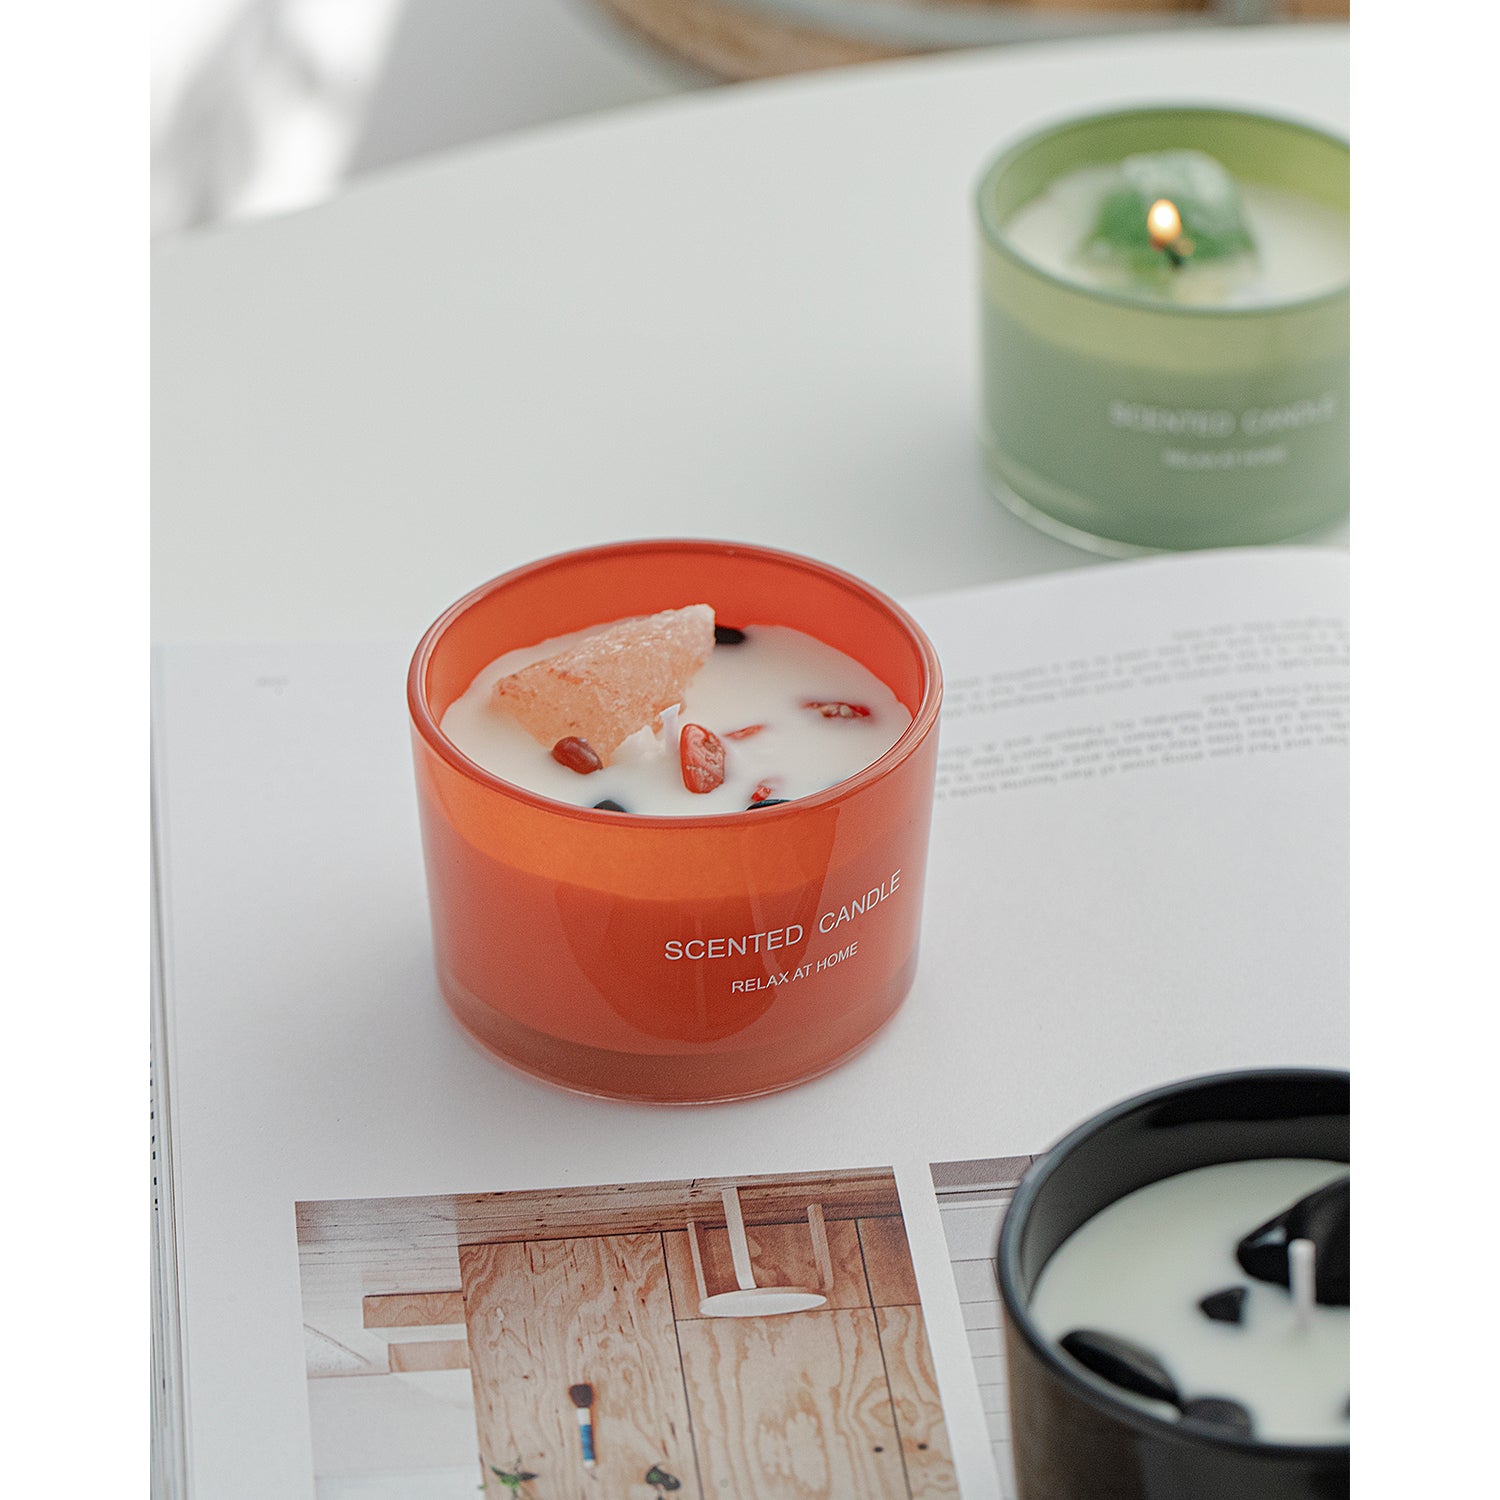 CITTA Love Series Crystal Stone Scented Candle Aromantic Natural Soy Wax 80G Home Fragrance Aromatherapy Door Gift